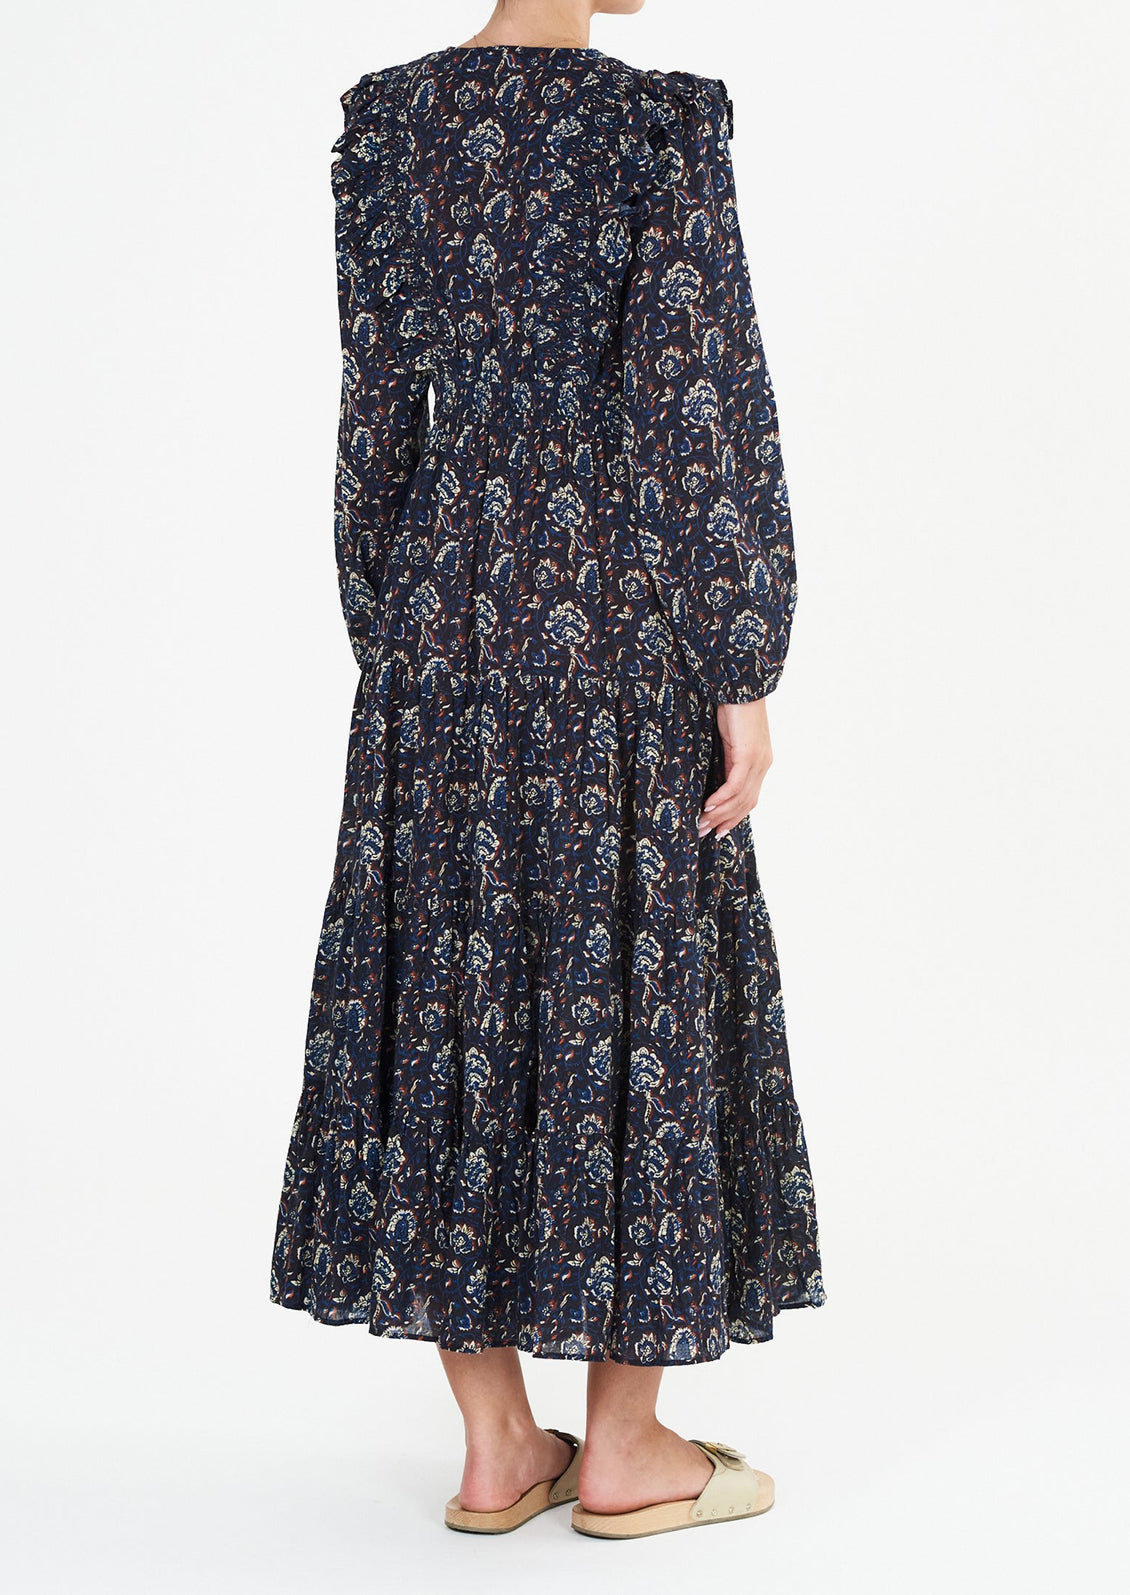 A long sleeve maxi dress with ruffled v-neck in black with blue, white and rust block print pattern.